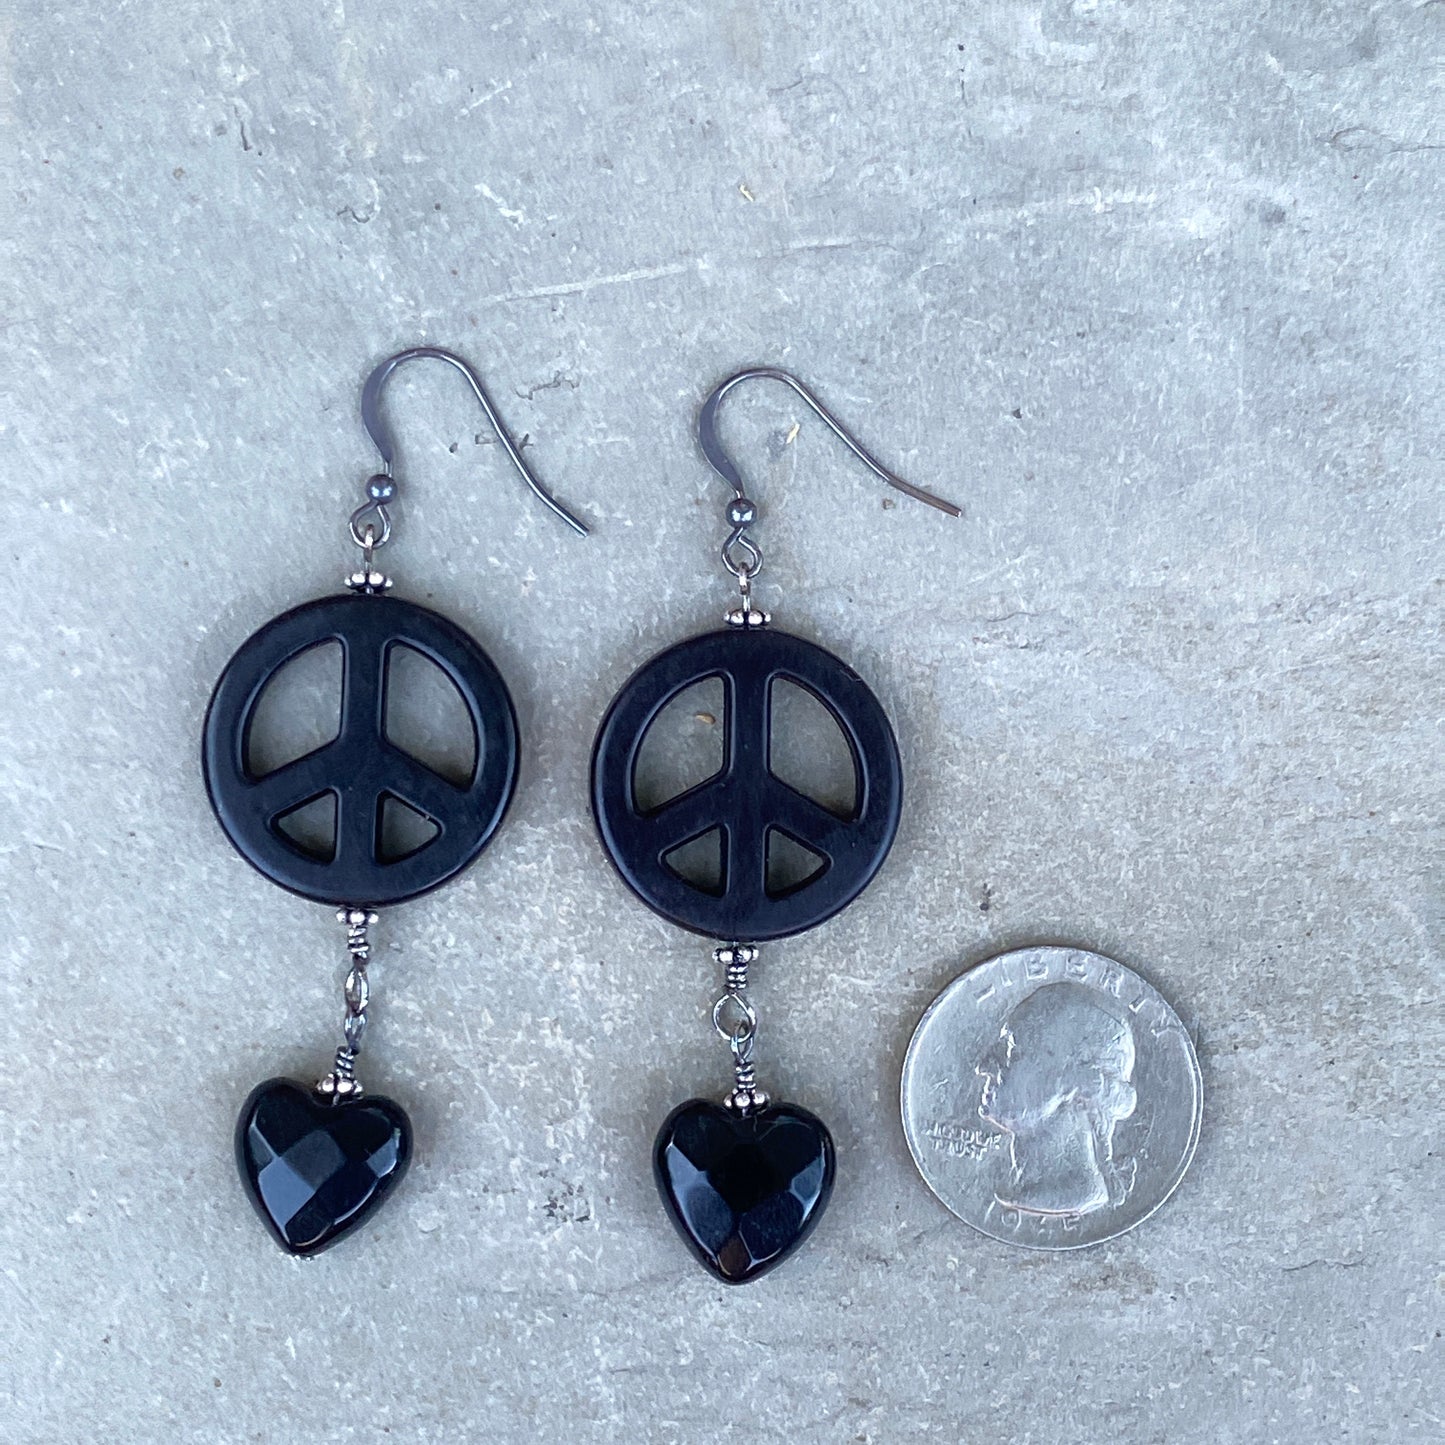 Black Onyx Faceted Hearts w/ Howlite Peace Signs and Sterling Silver Drop Earrings